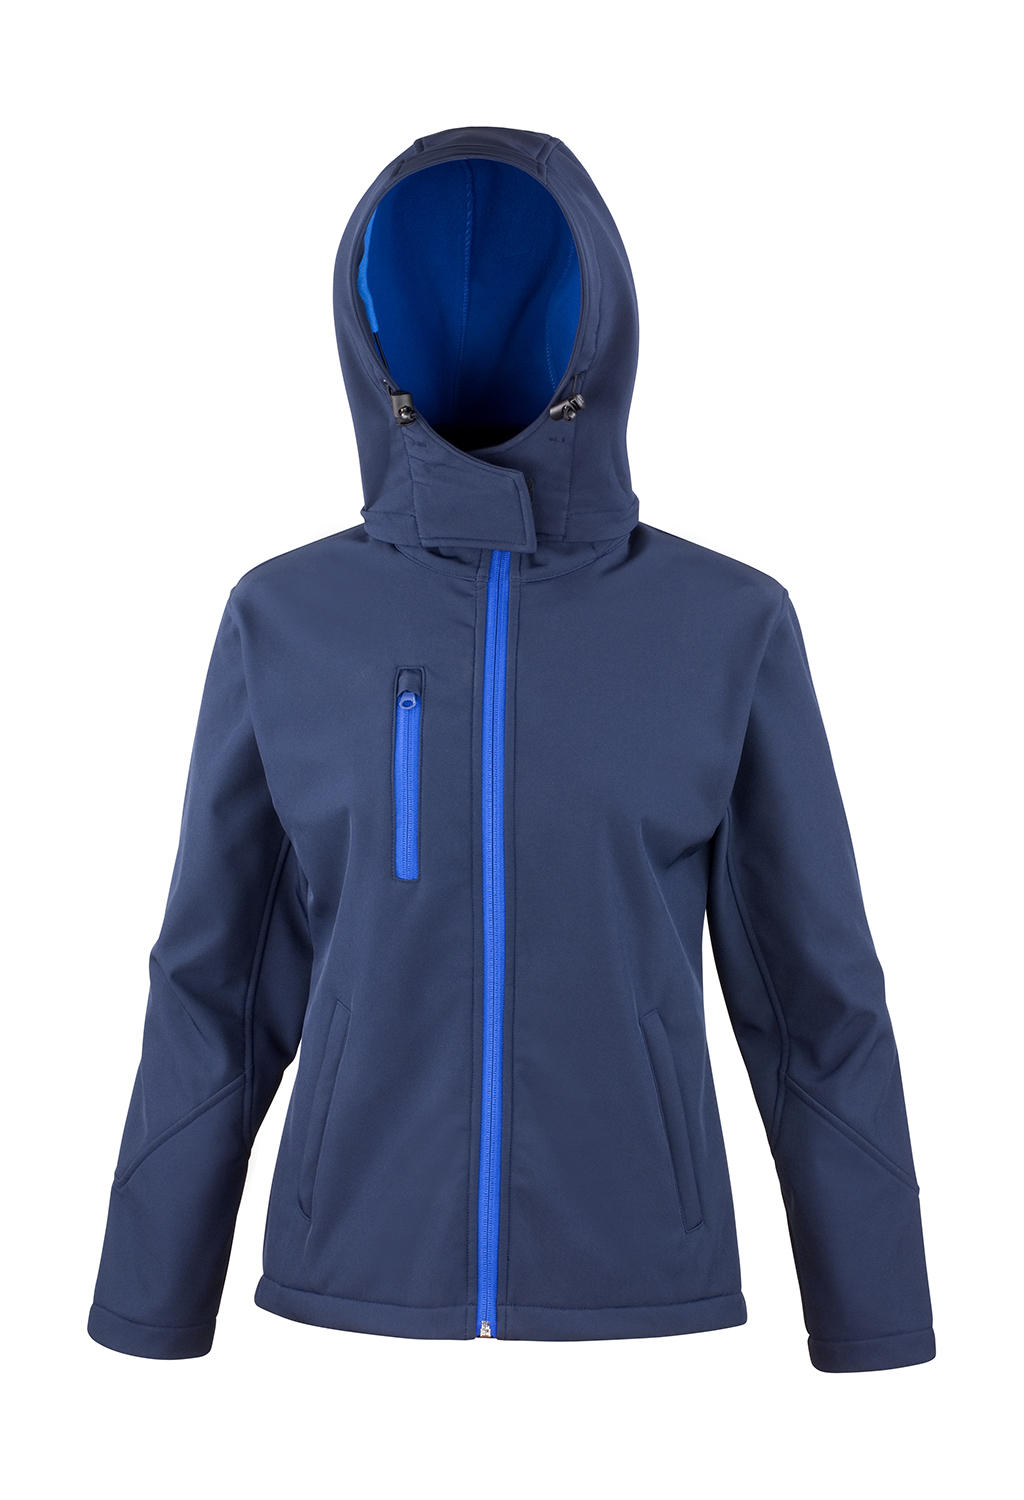  Ladies TX Performance Hooded Softshell Jacket in Farbe Navy/Royal